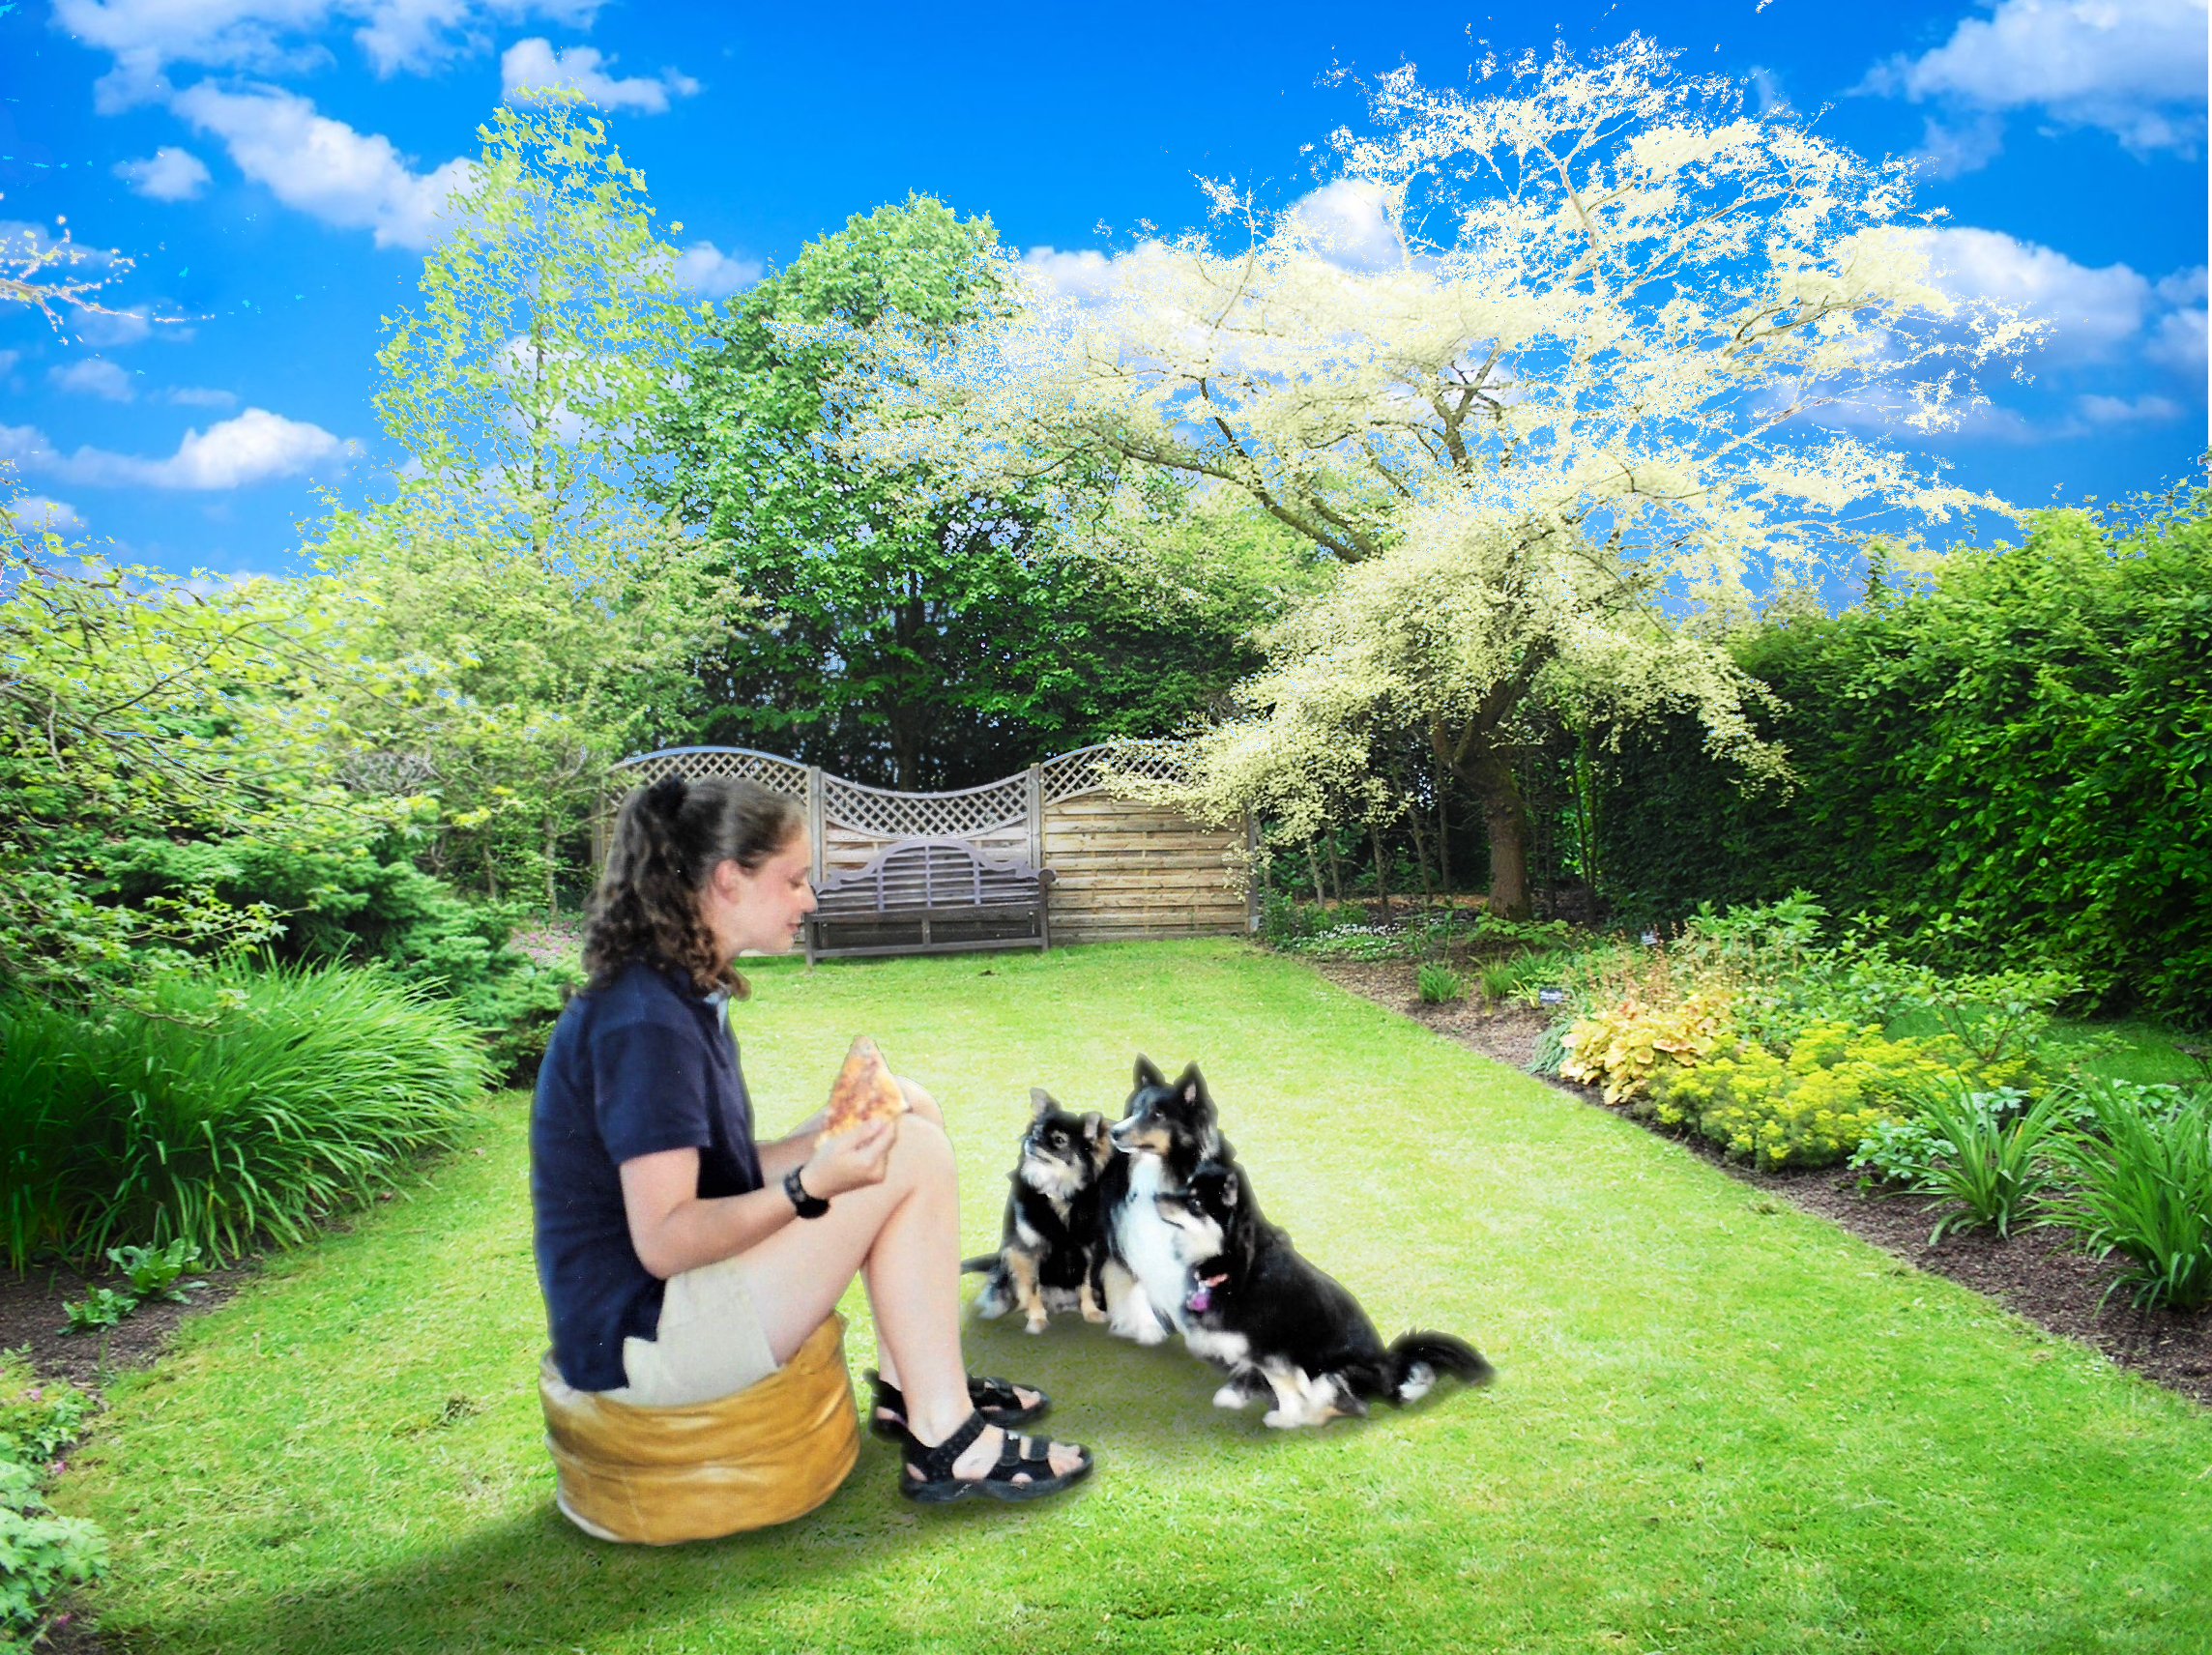 Girl in garden with her dogs - retouched